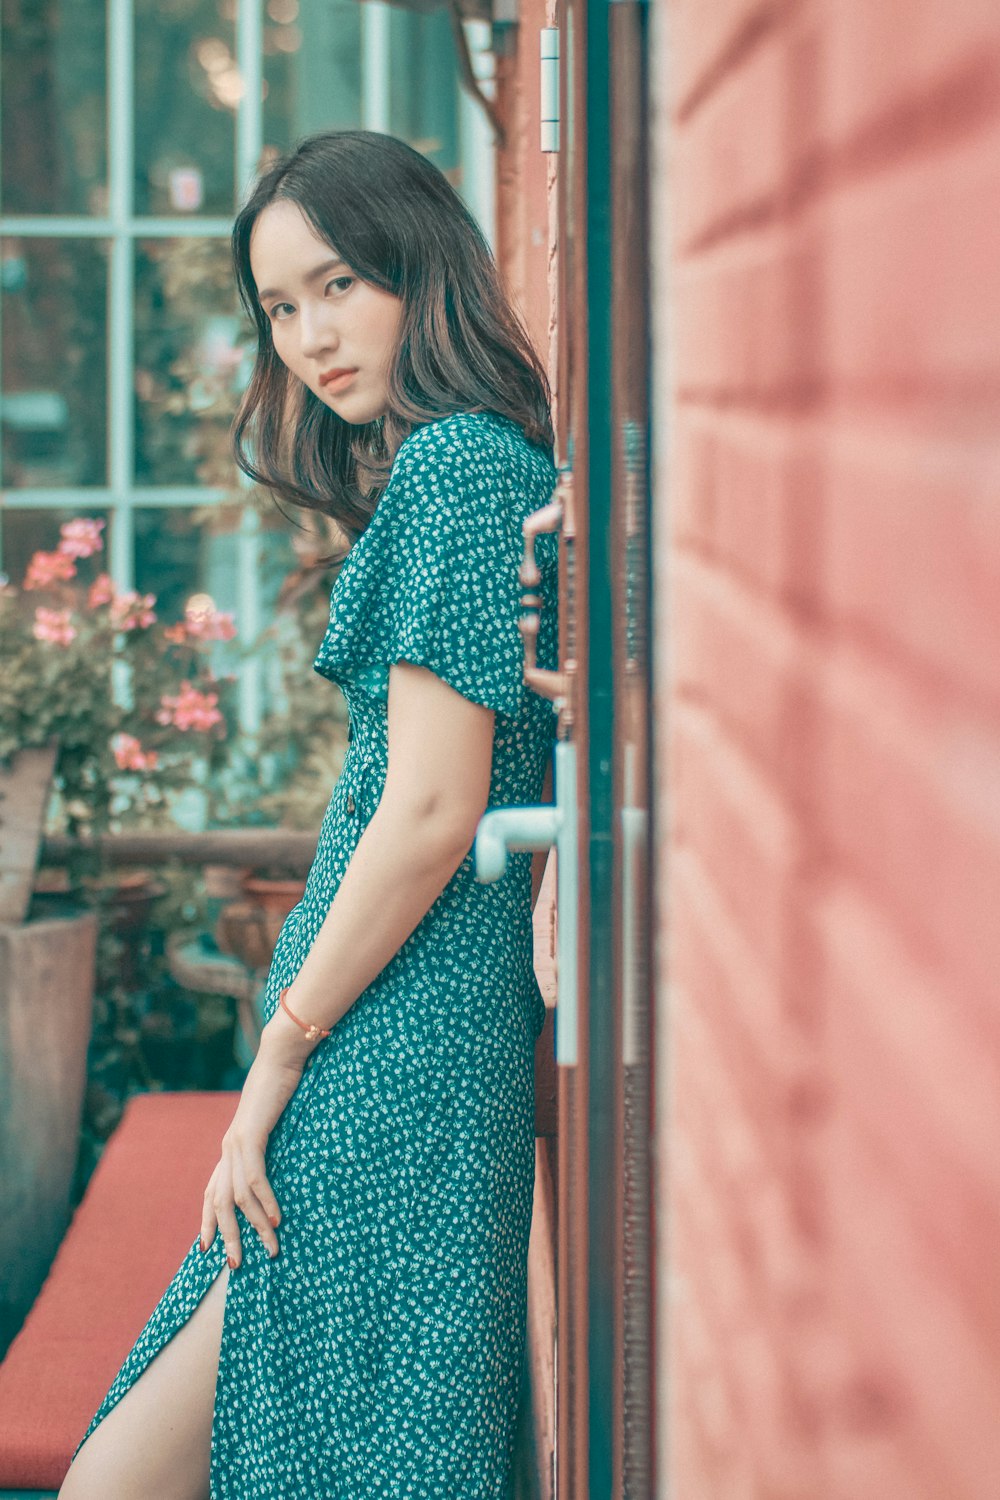 woman in blue and white polka dot dress standing beside red metal railings